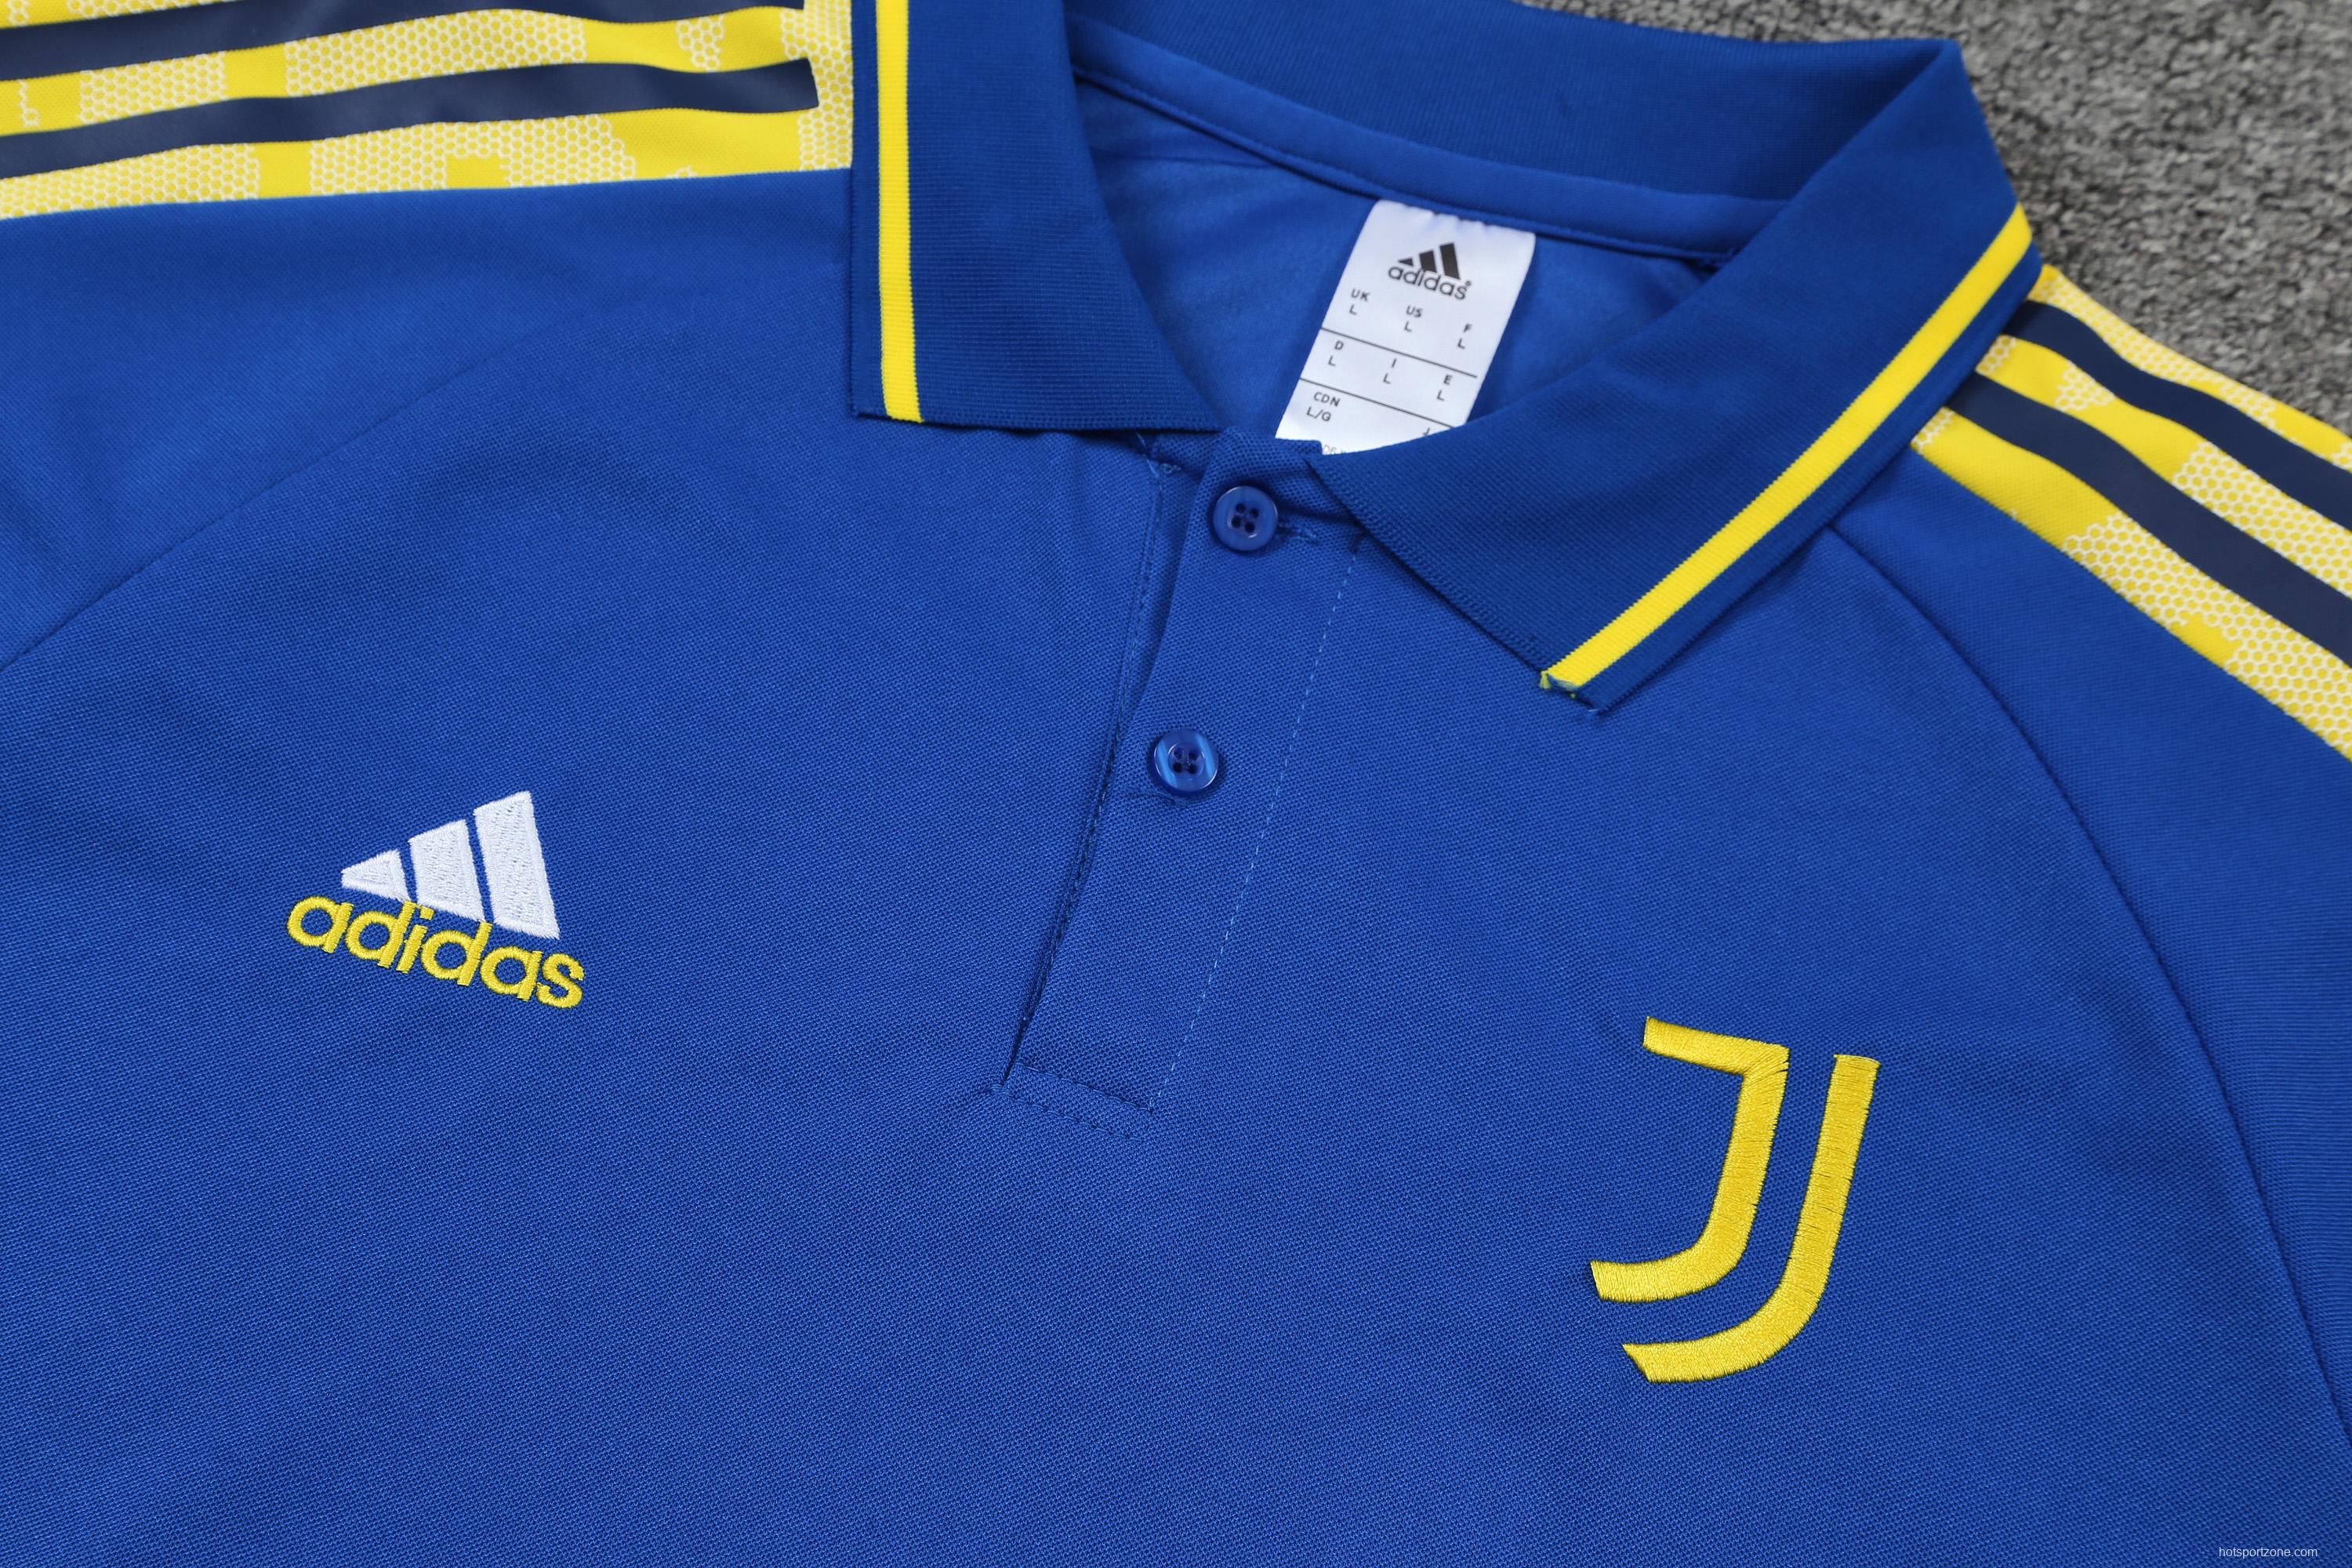 Juventus POLO kit blue and yellow stripes(not supported to be sold separately)